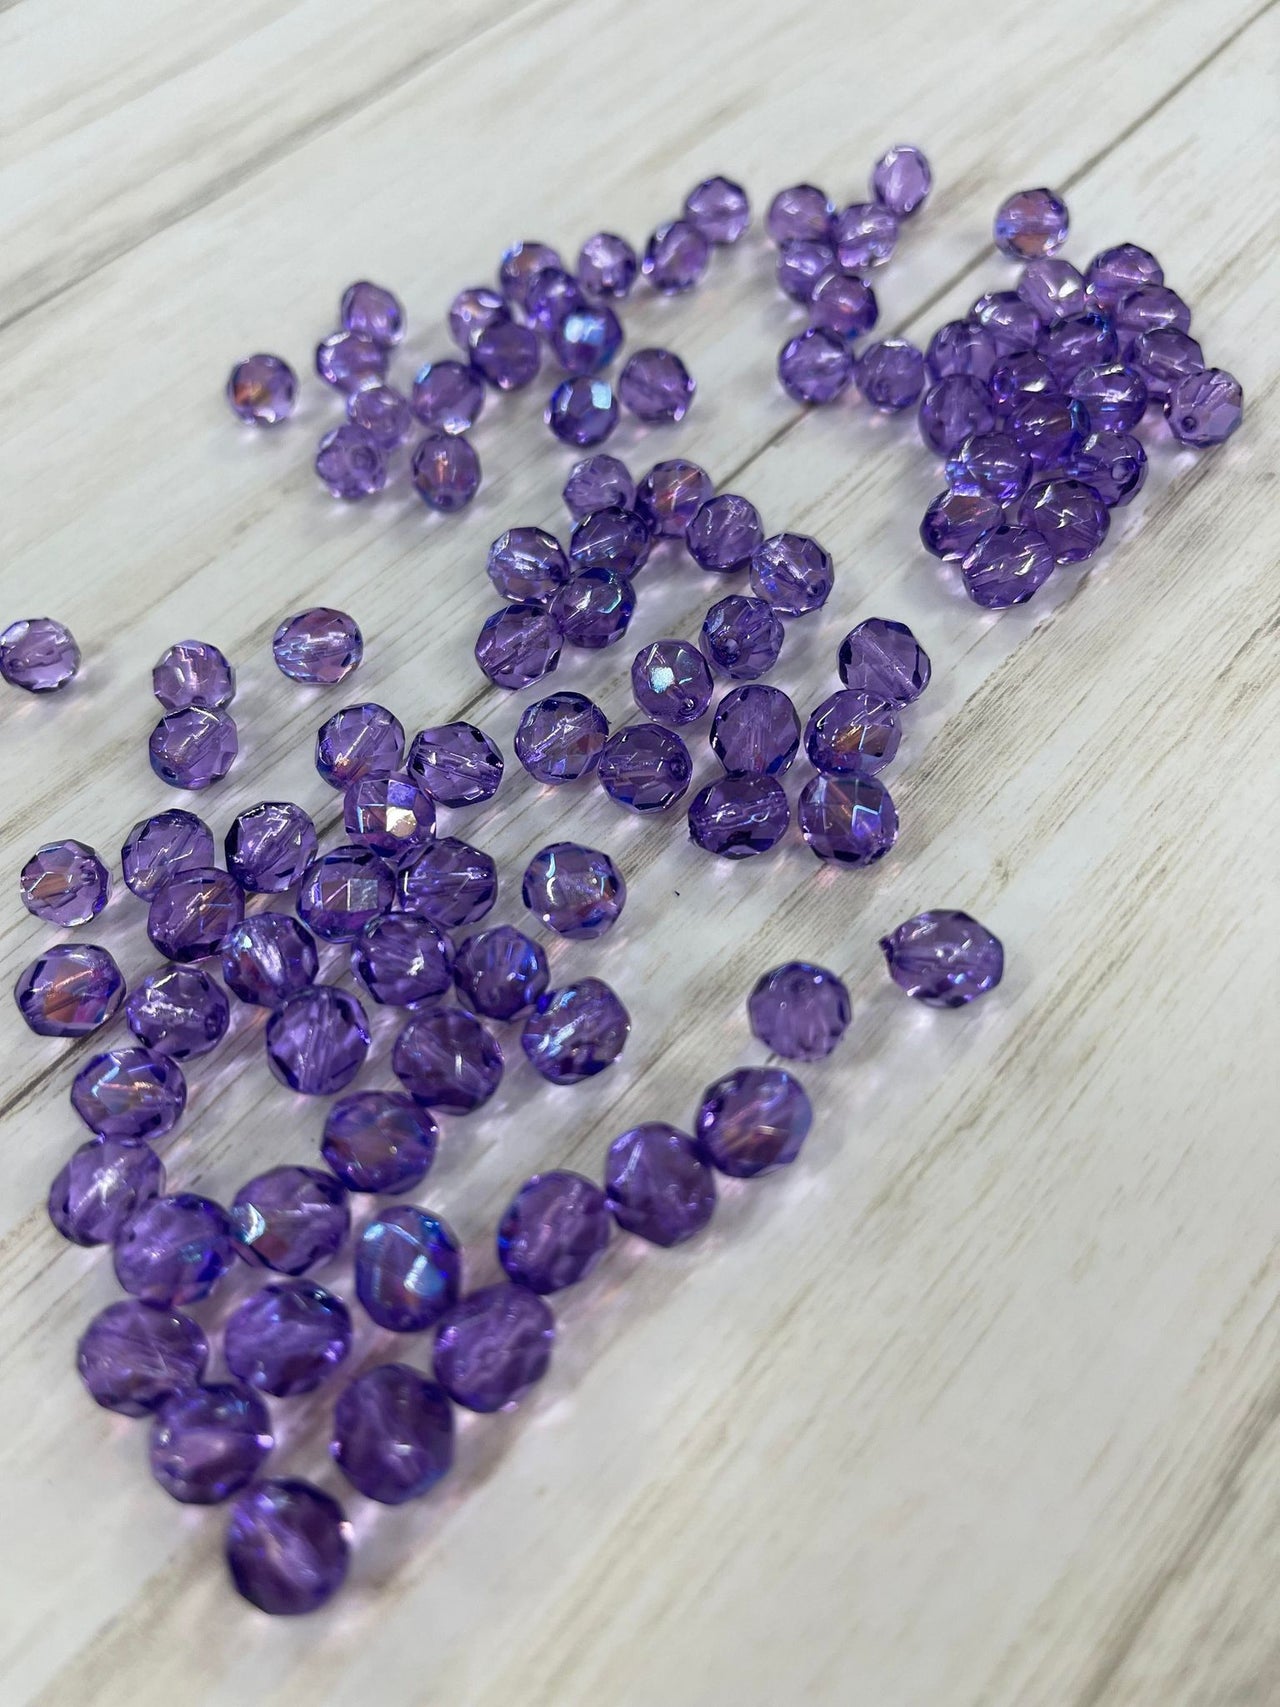 Bead, acrylic, transparent clear, 8mm faceted round. Sold per 100-gram pkg,  - Fire Mountain Gems and Beads